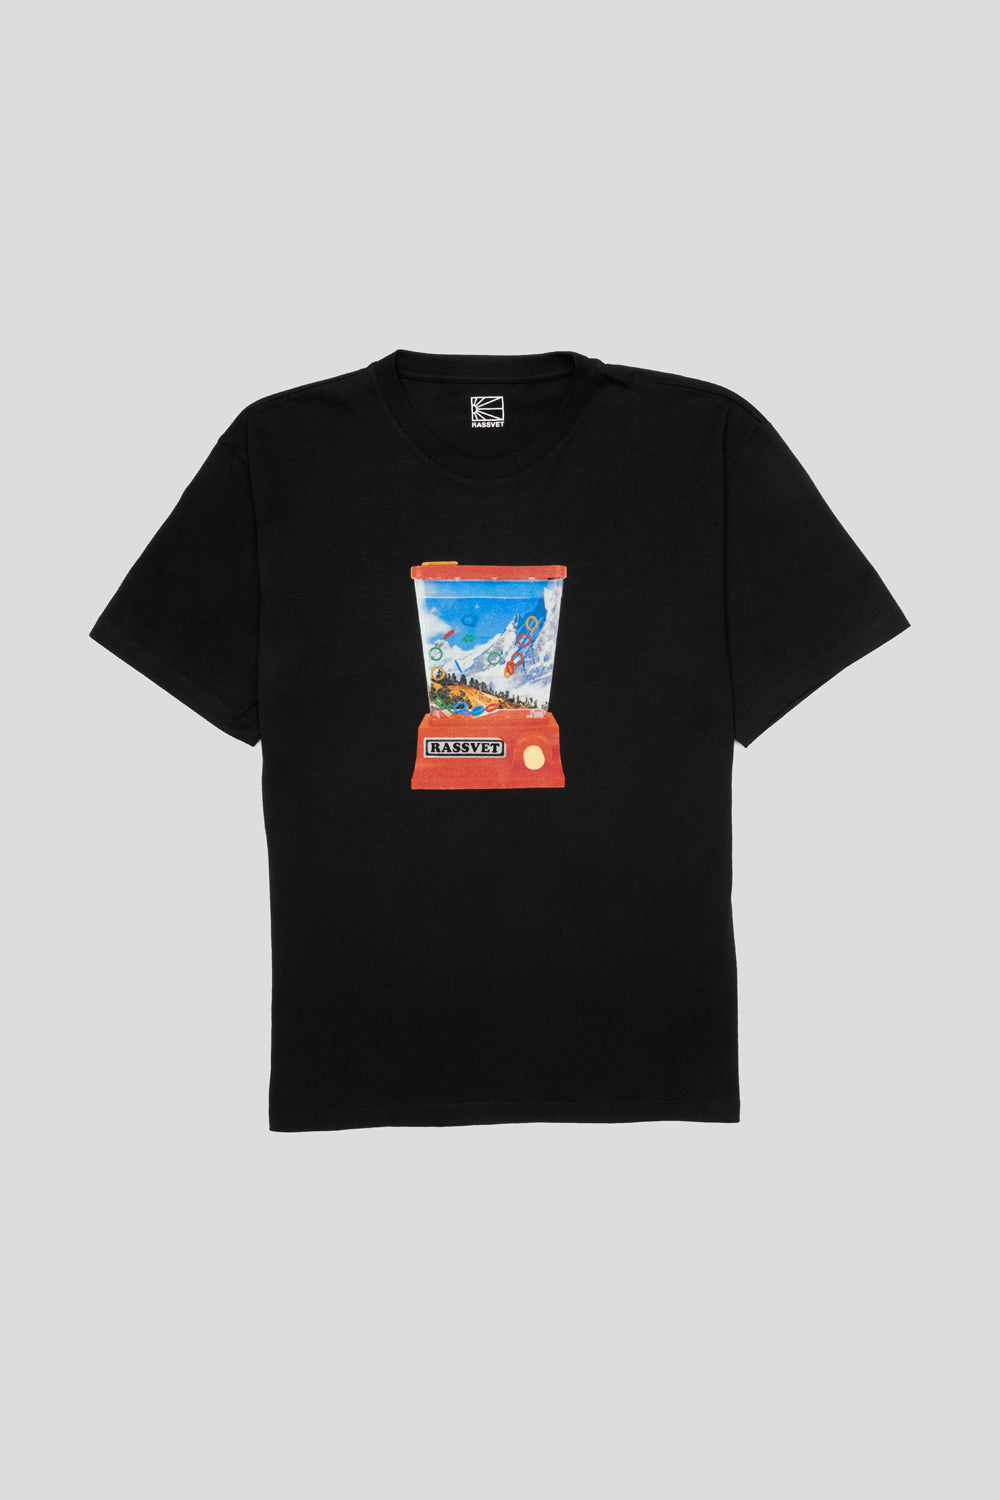 Waterful Ring Toss Tee